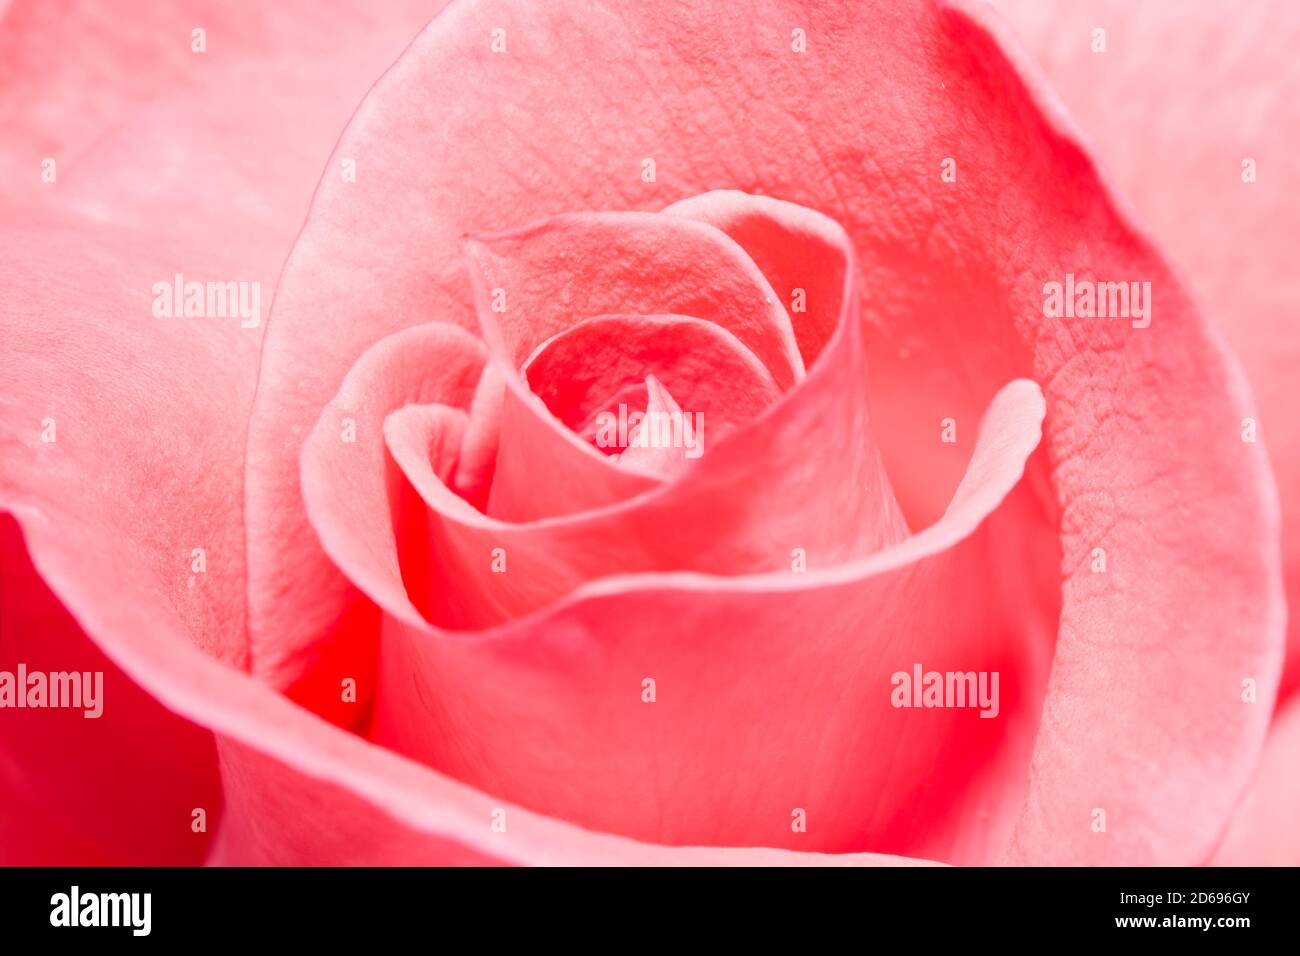 Closeup of a flawless pink rose Stock Photo